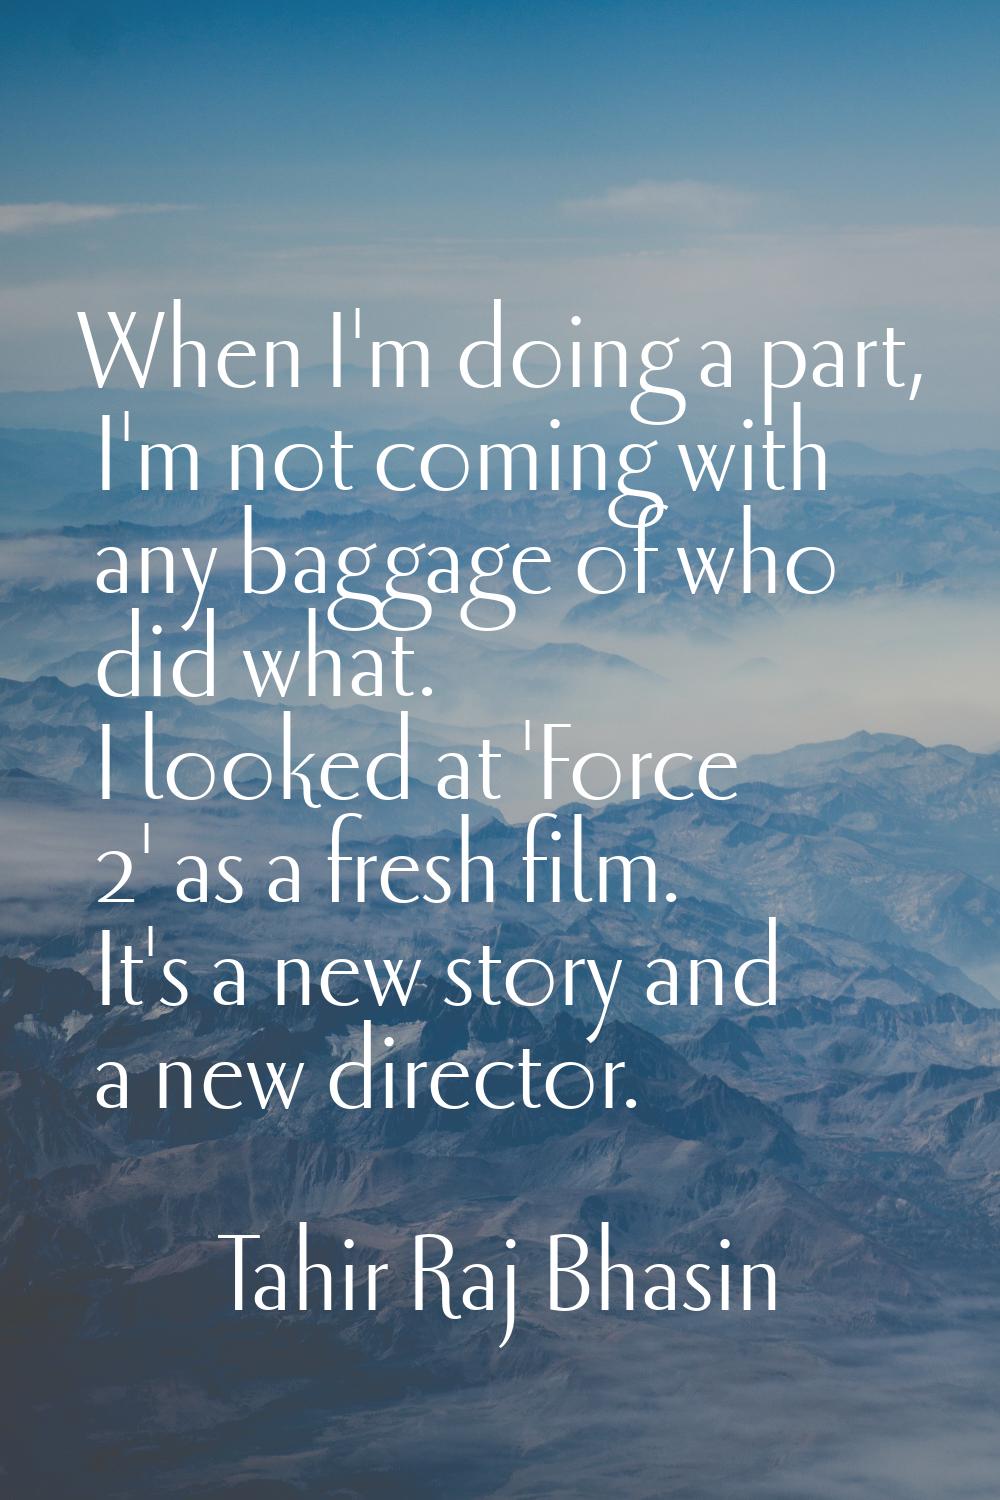 When I'm doing a part, I'm not coming with any baggage of who did what. I looked at 'Force 2' as a 